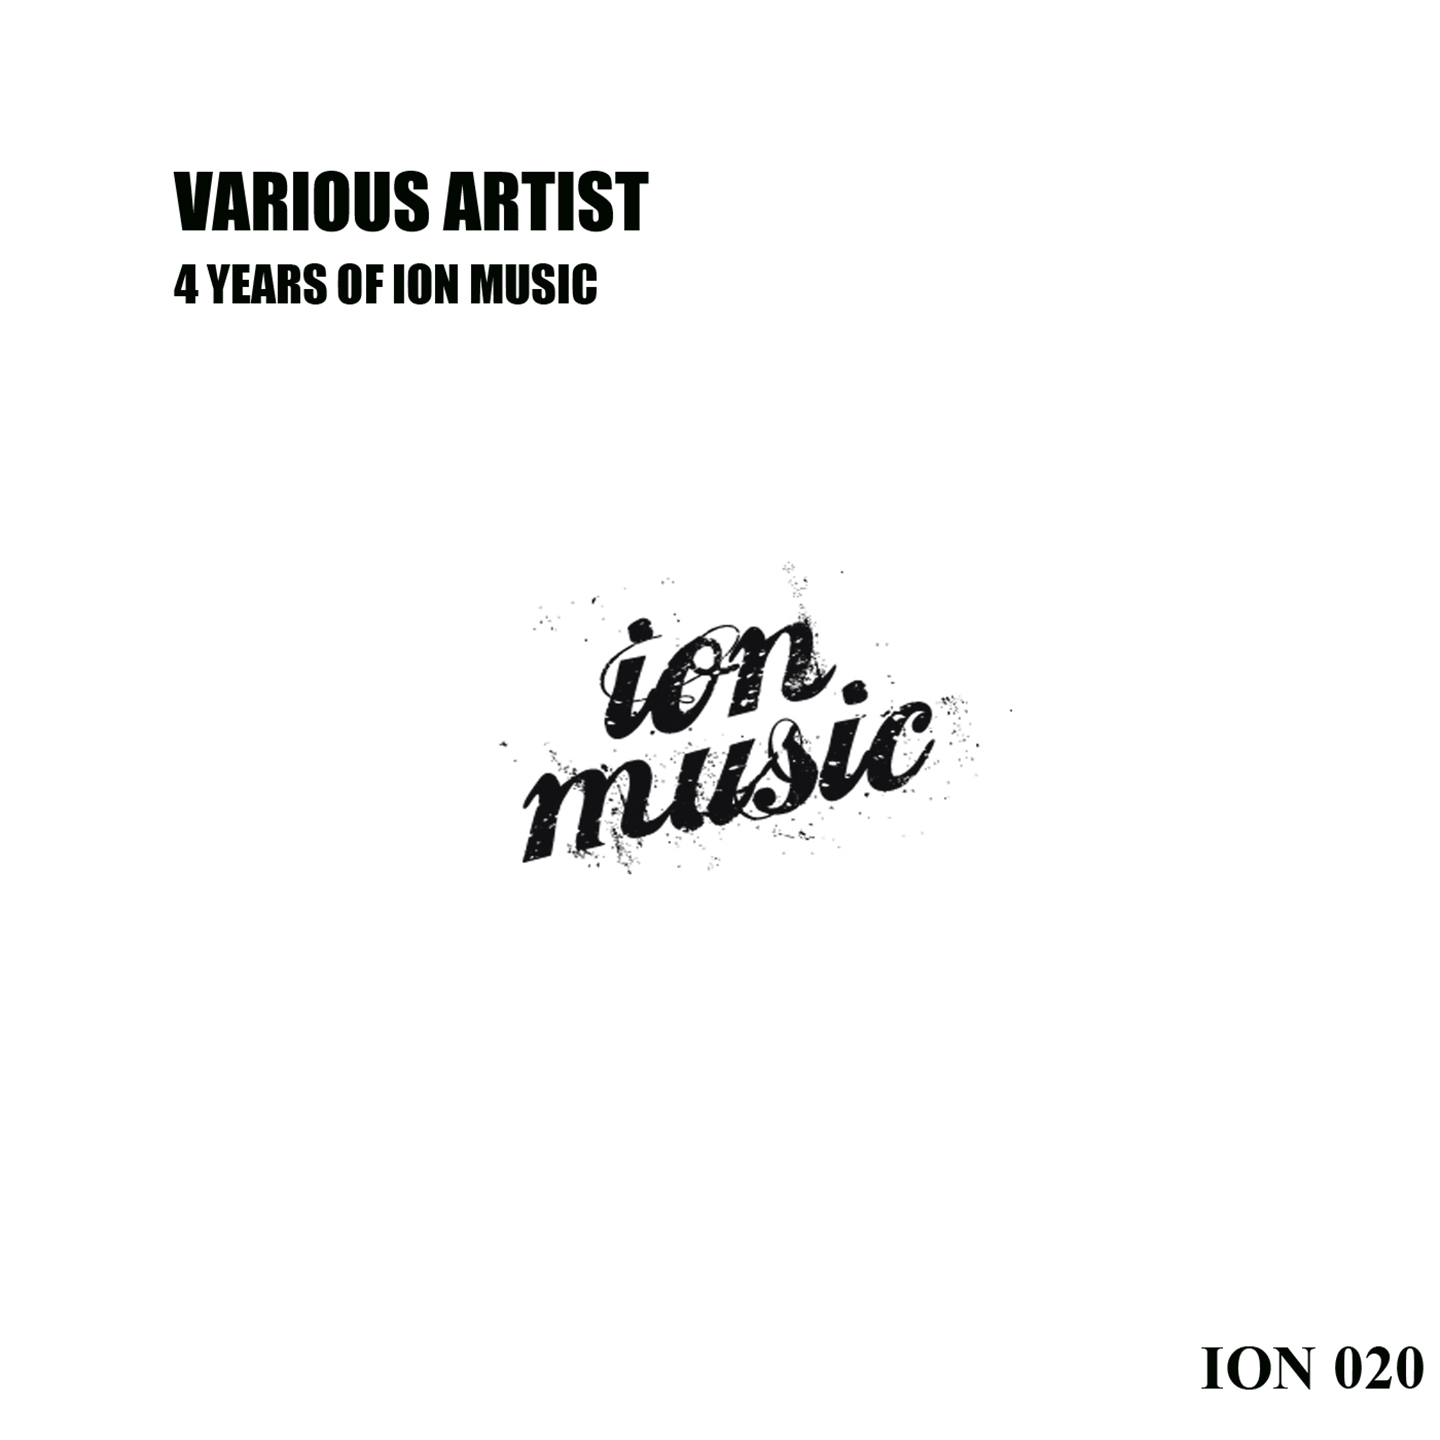 4 Years of Ion Music